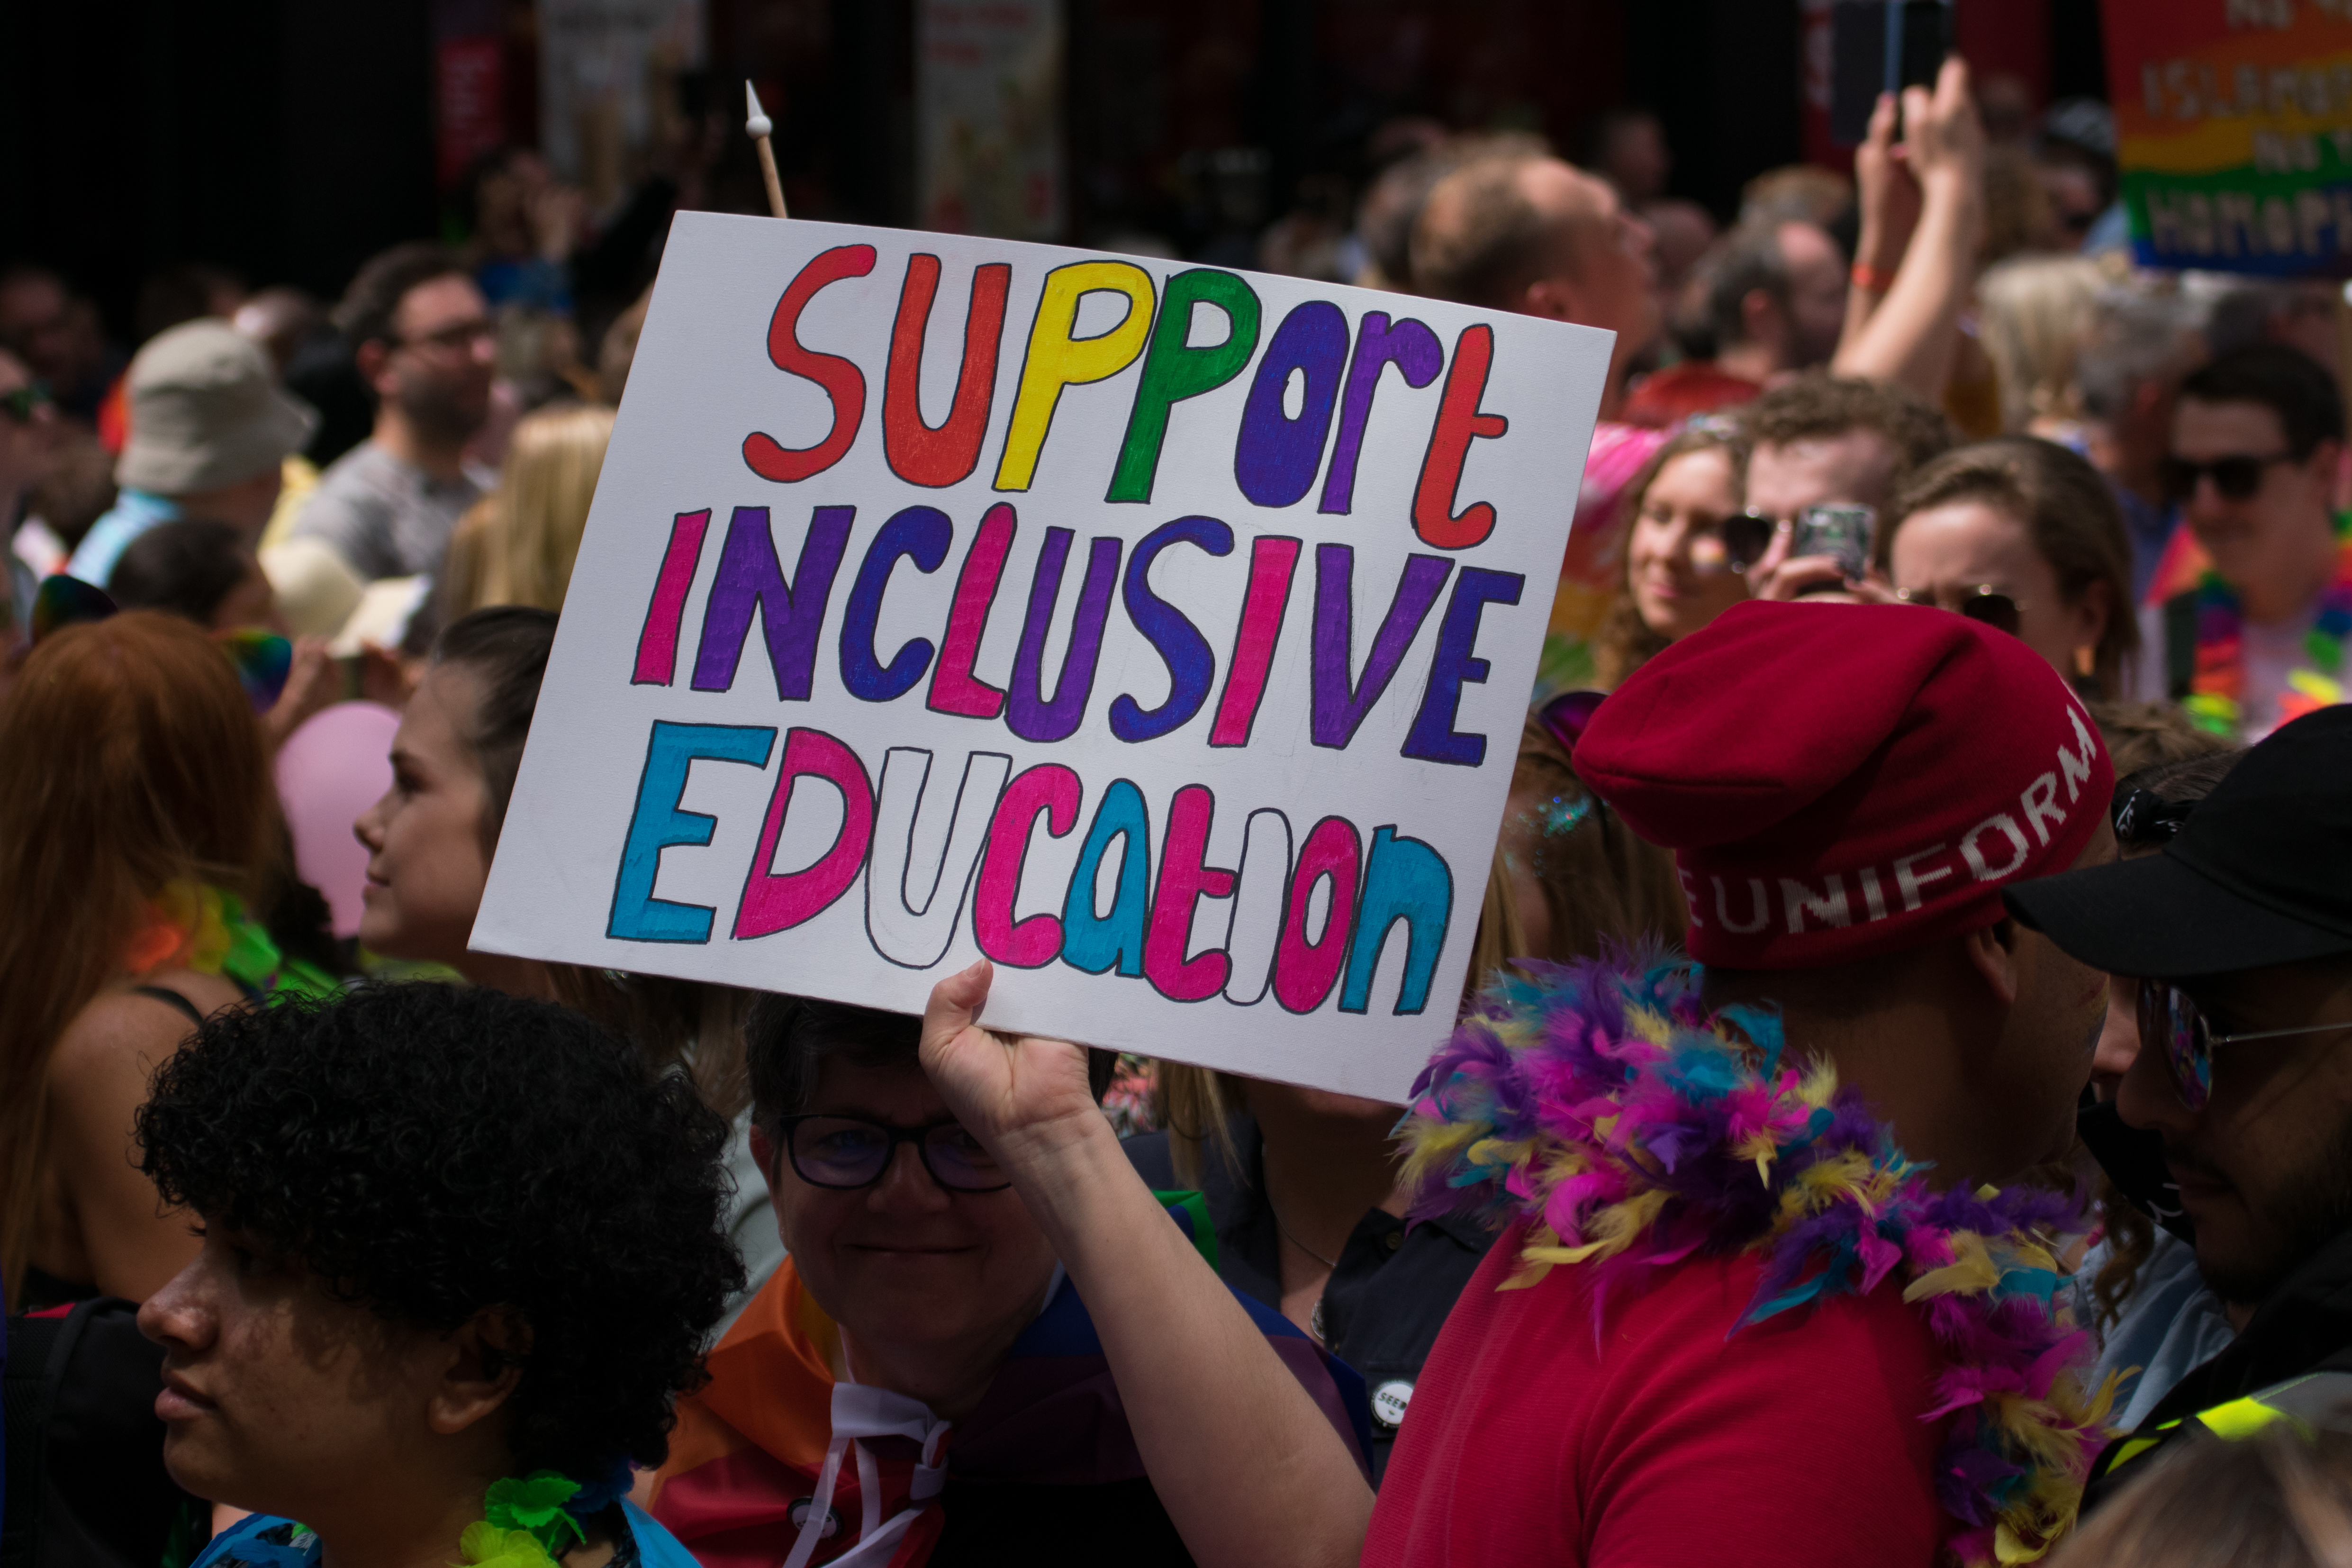 Thousands of members of the LGBTQ community gathered today for the Birmingham Pride parade on May 25, 2019, in Birmingham, United Kingdom.